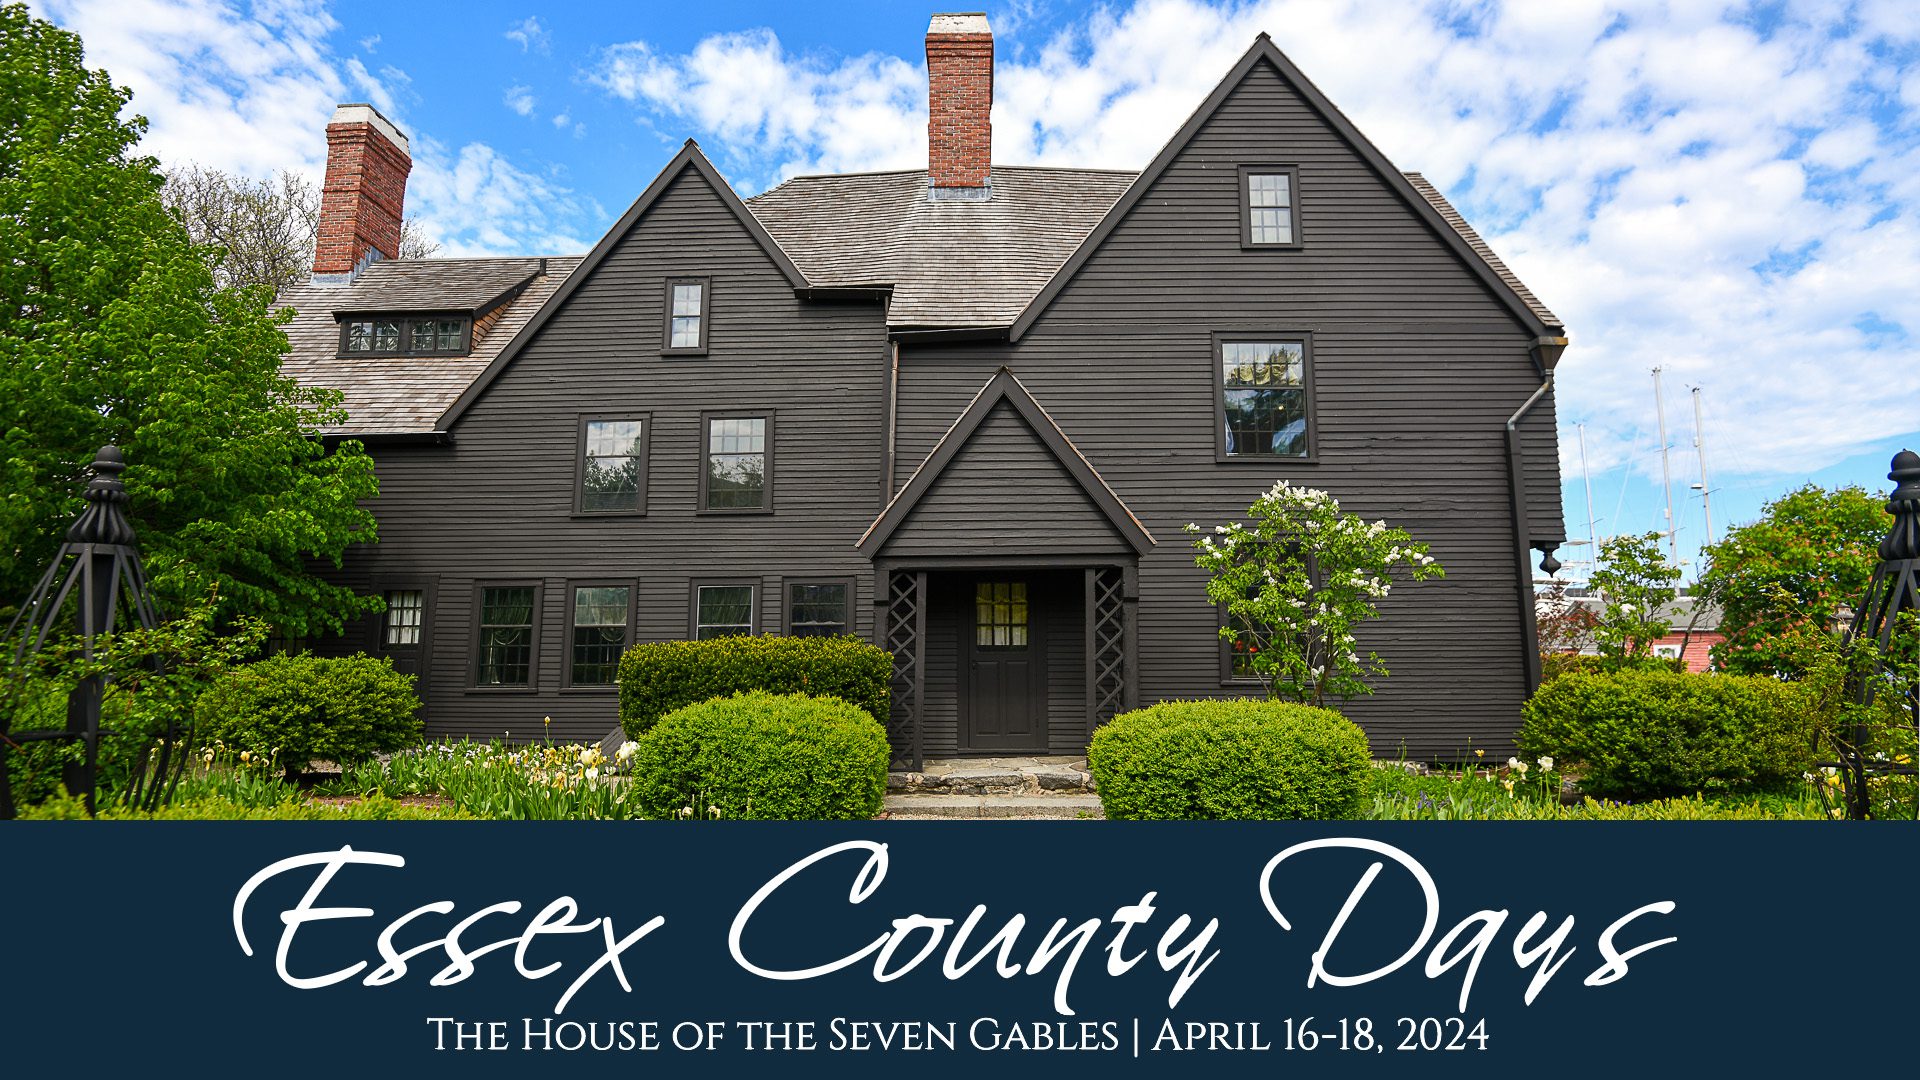 Experience the charm of a vintage wooden home with a unique dark exterior set against a beautiful blue sky. Celebrate Essex County Days at the iconic House of the Seven Gables from April 16-18, 2024.